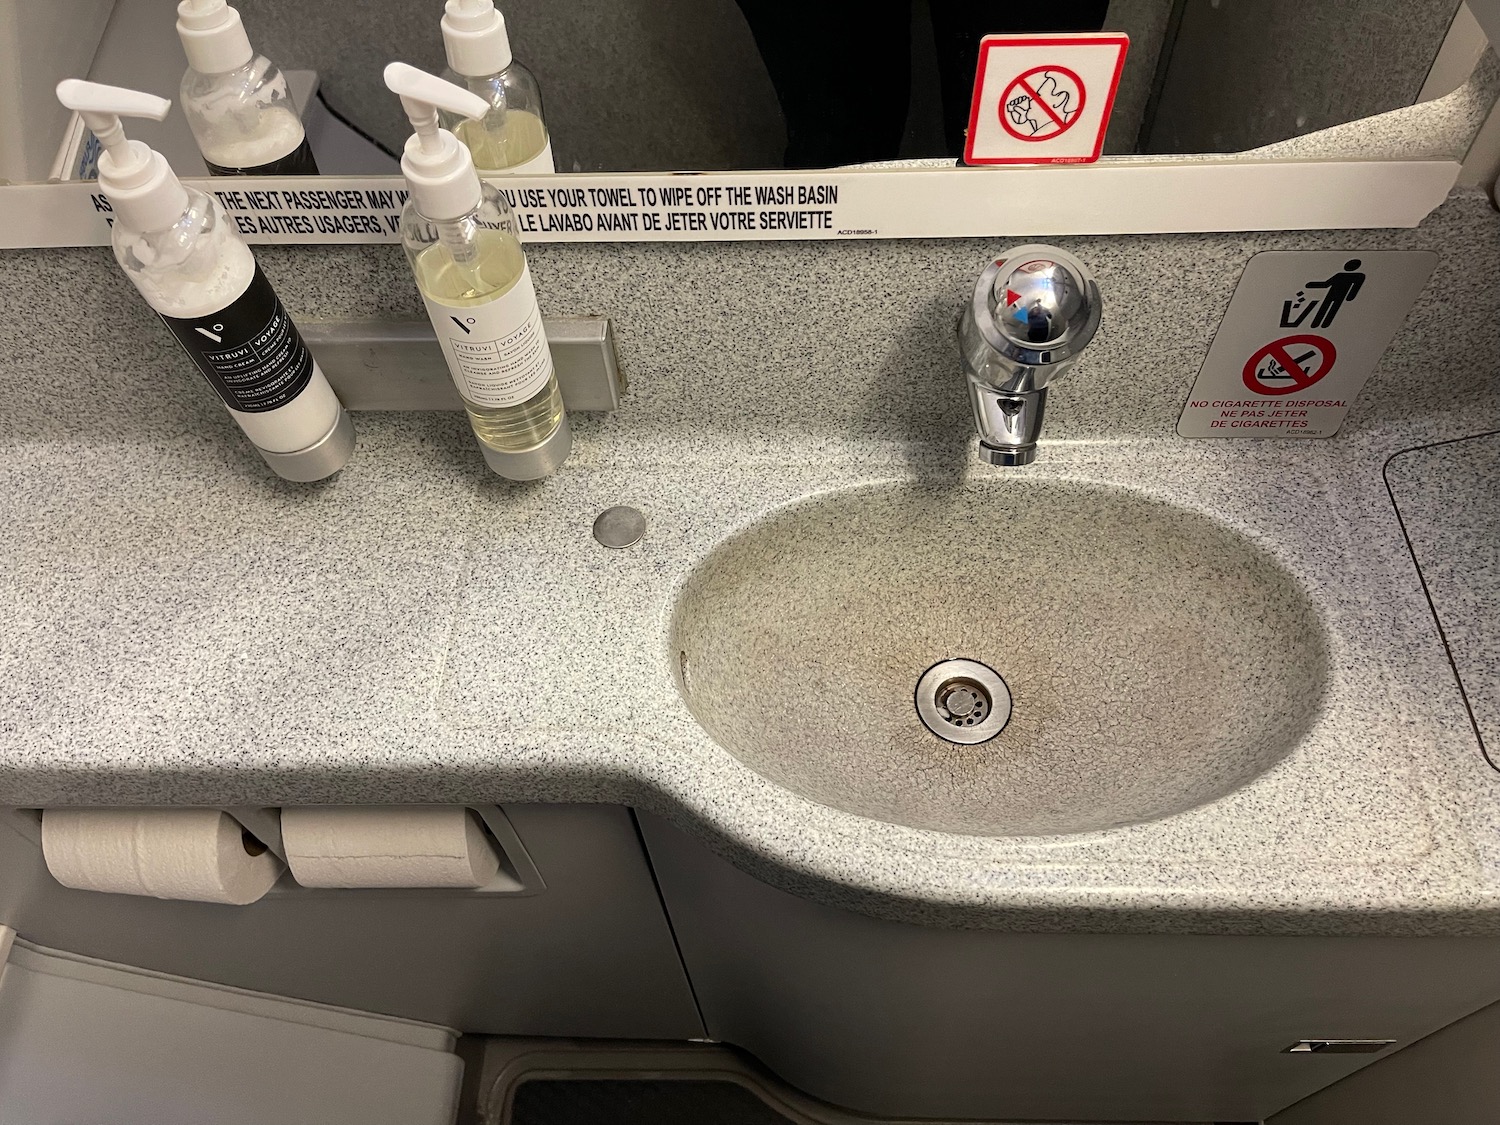 a sink with soap dispensers and a sign